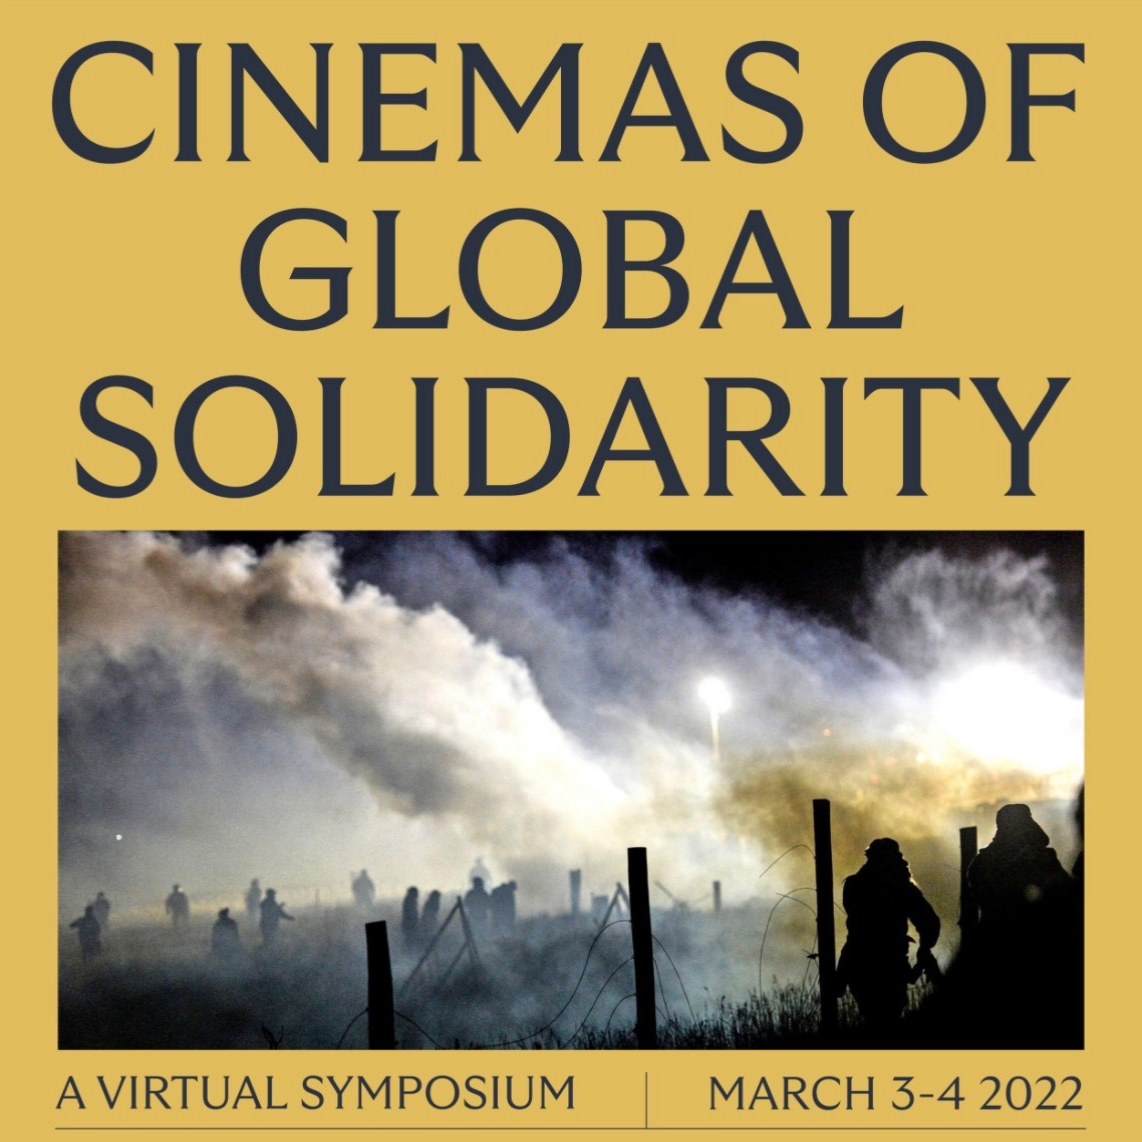 The online flyer for the Cinemas of Global Solidarity Symposium.